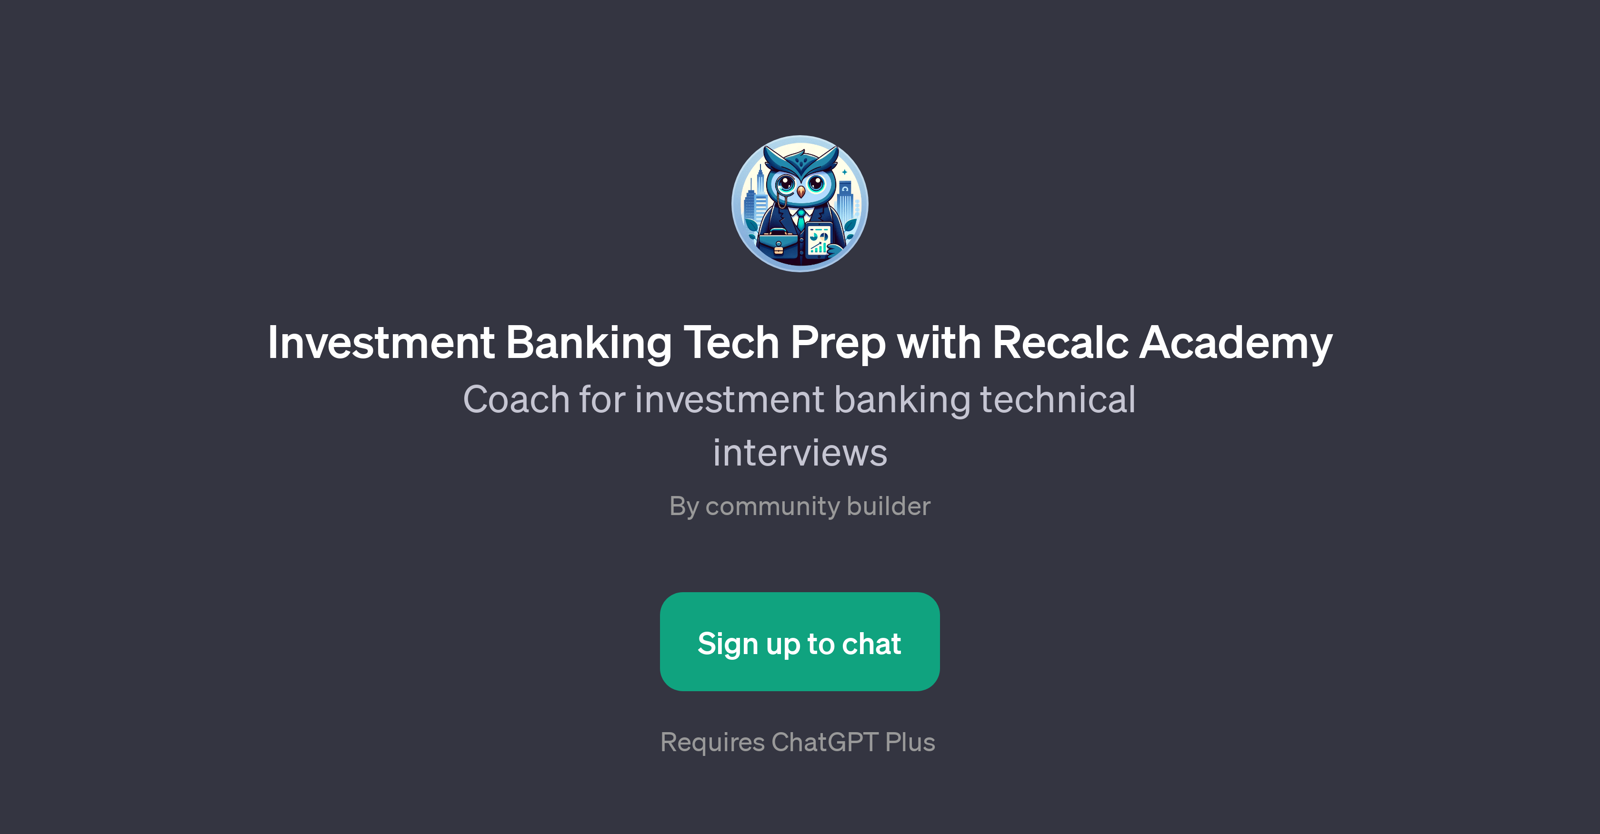 Investment Banking Tech Prep with Recalc Academy website